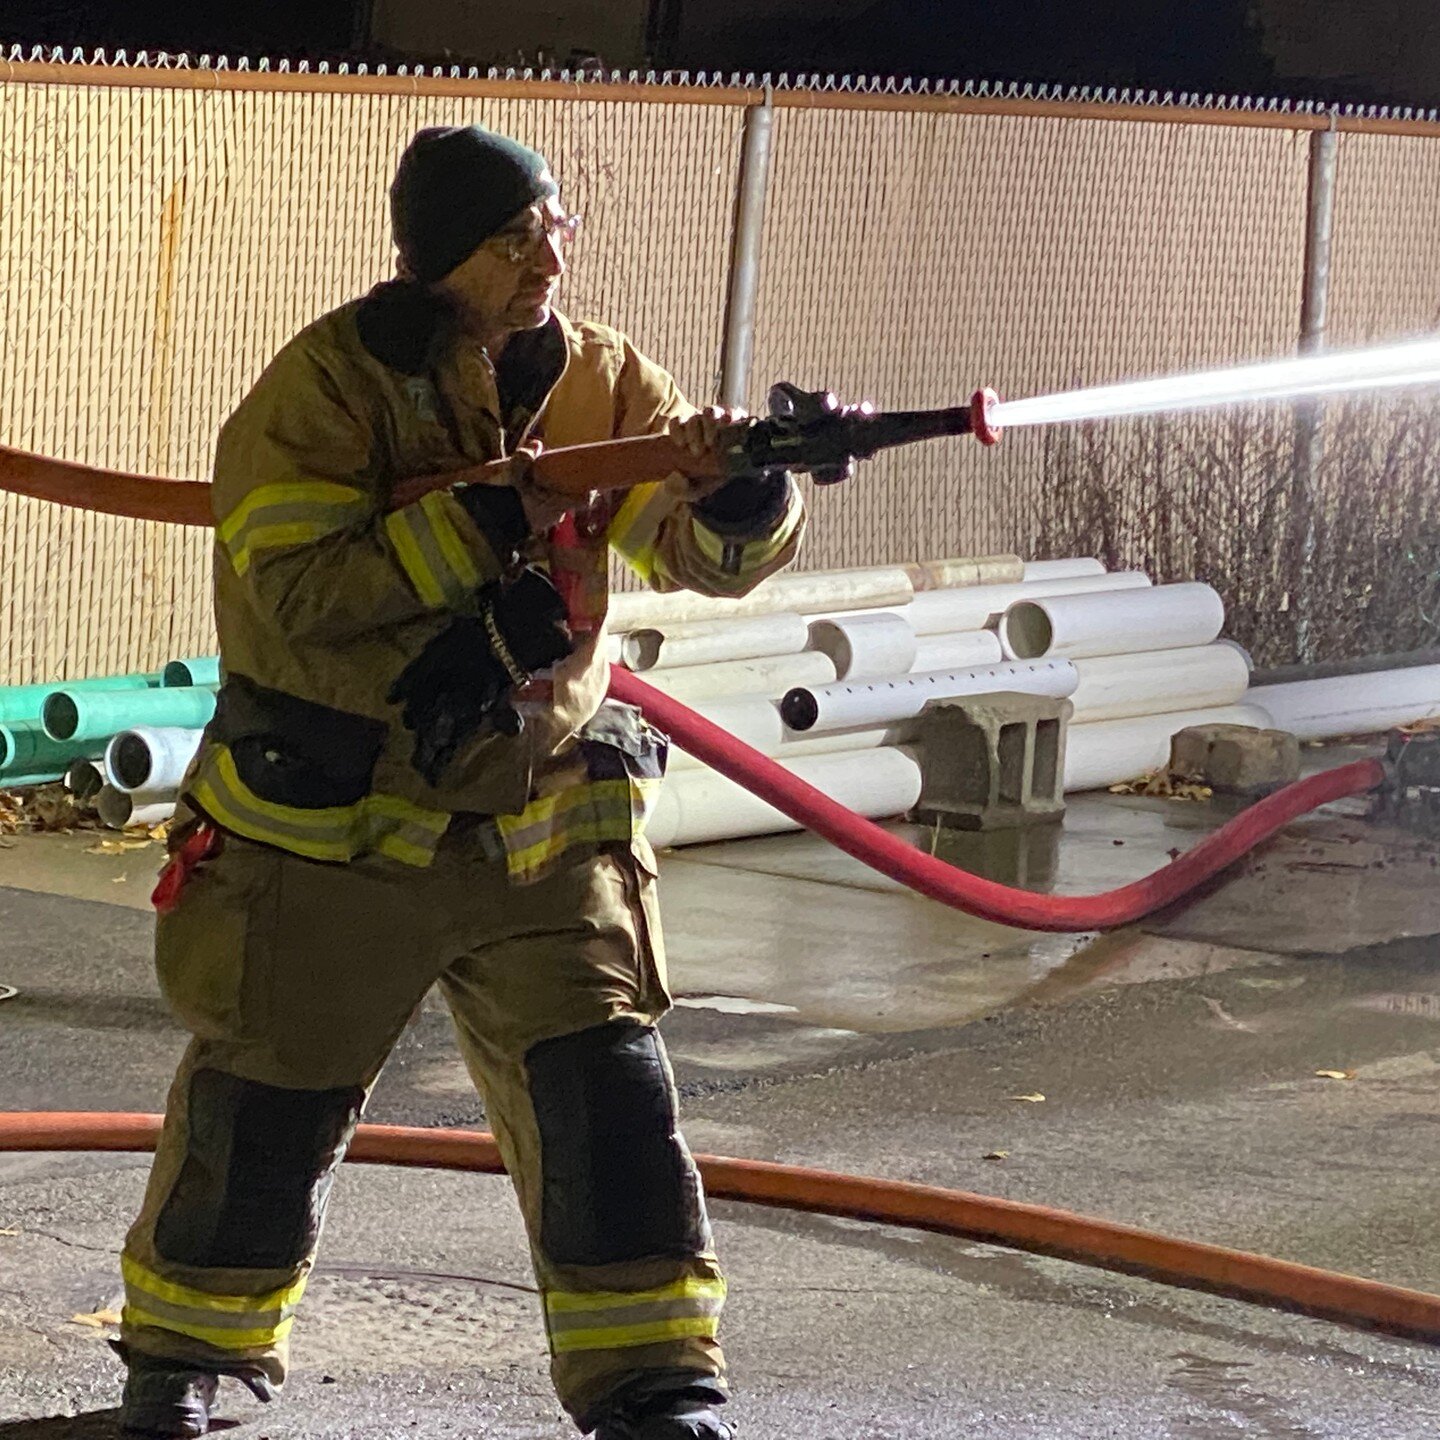 The primary tool of the engine company is WATER! Recently, we spent the evening testing new nozzles that will help us get &quot;the wet stuff on the red stuff&quot; more efficiently.